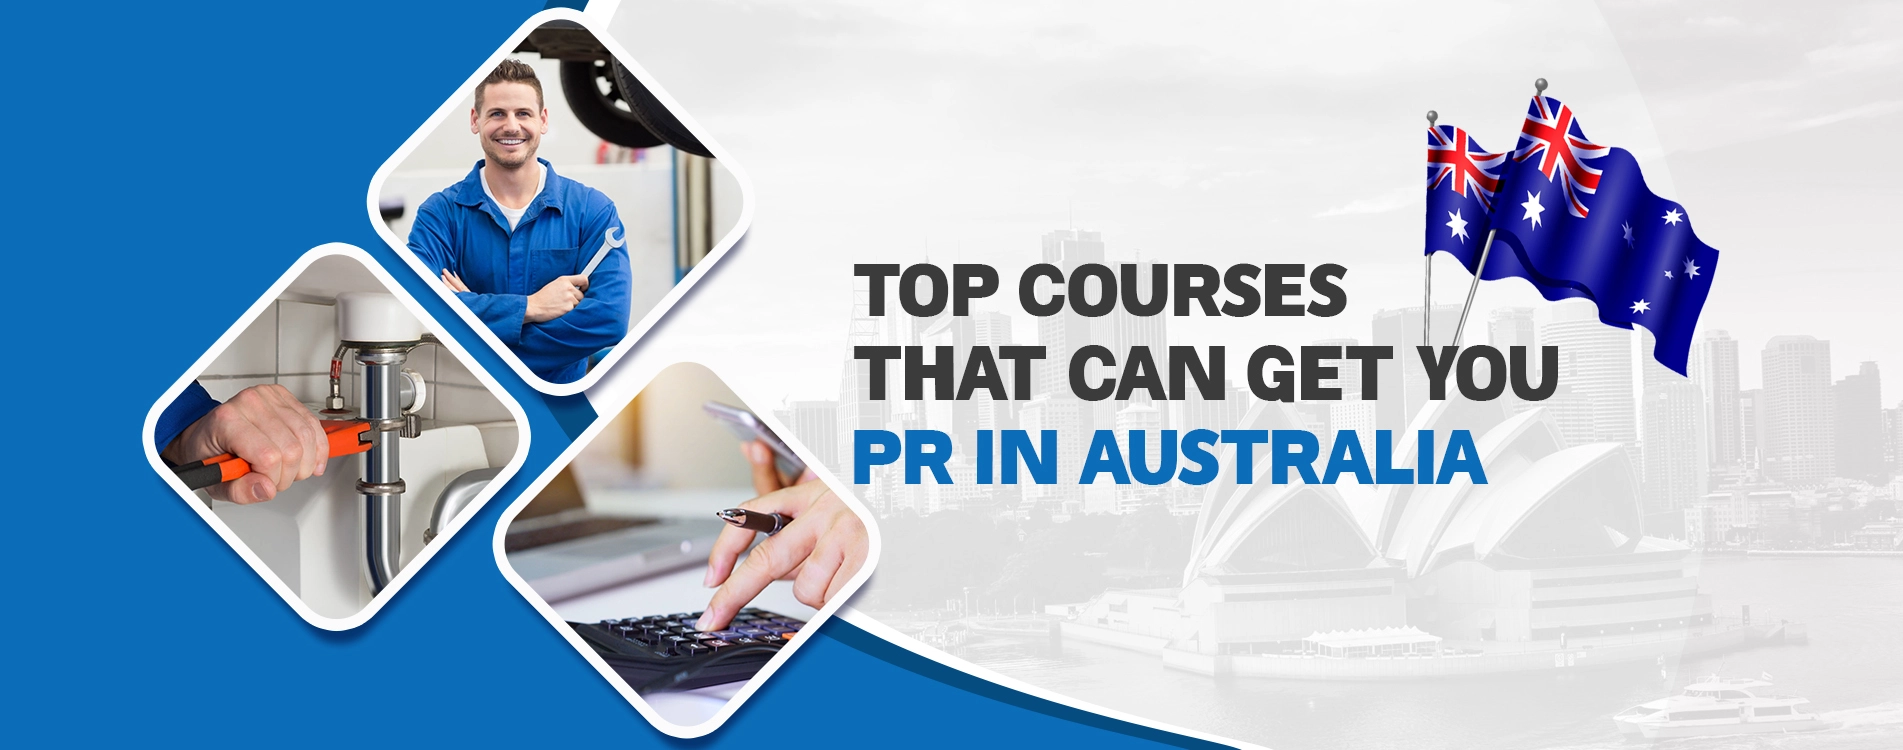 Top Courses That Can Lead to Permanent Residency in Australia